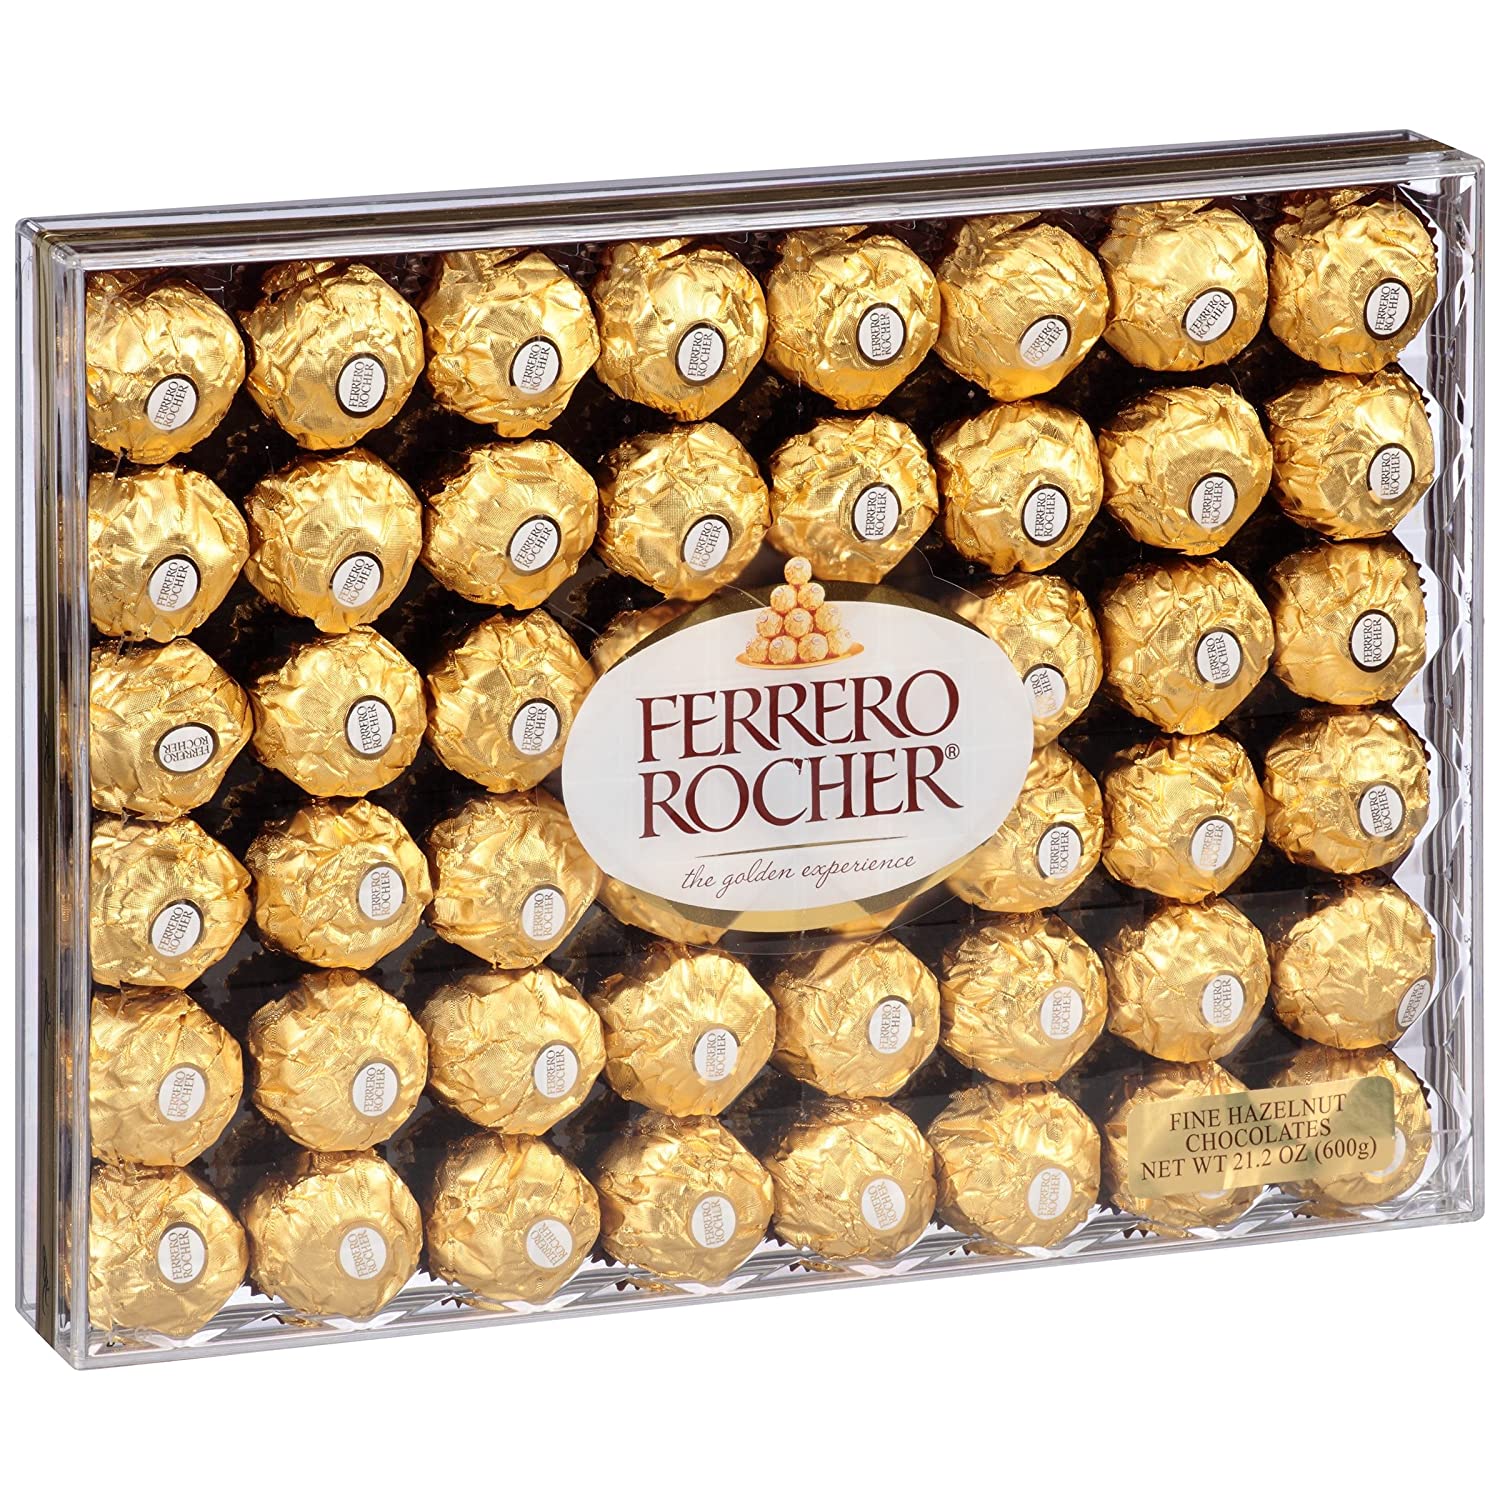 Ferrero Rocher 48-Count Gold Wrapped Chocolate Candy